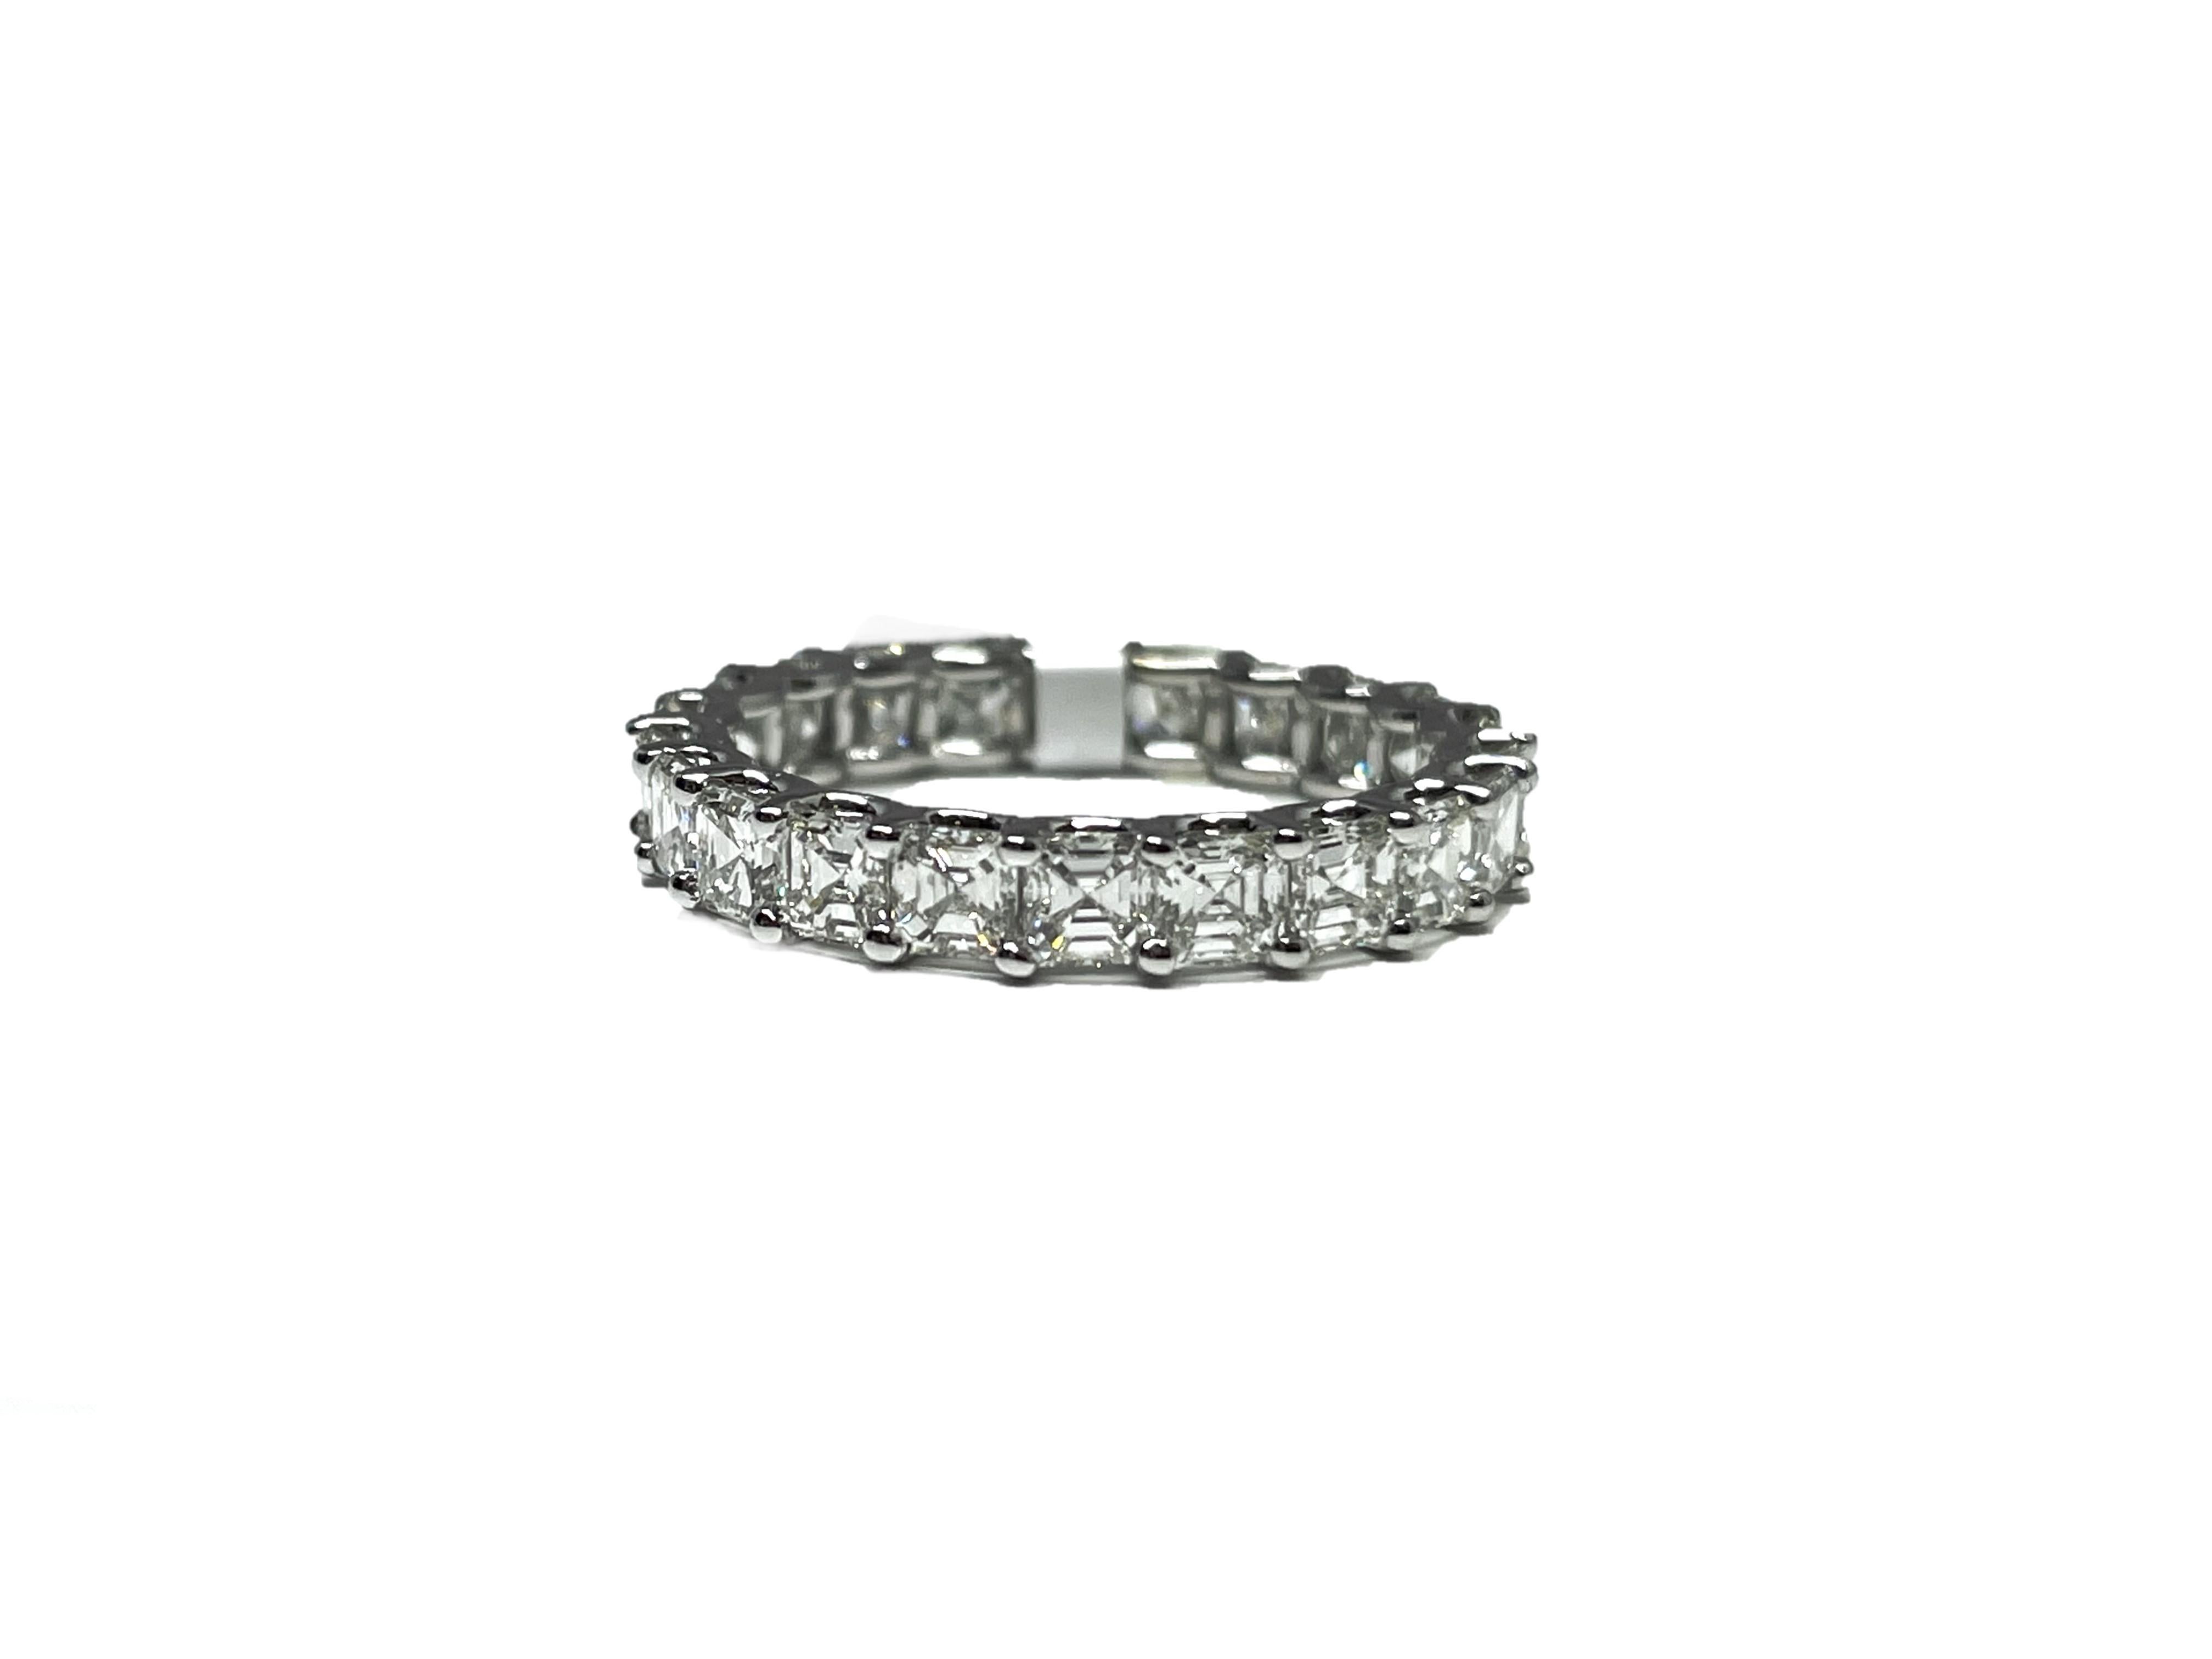 This stunning 18k white gold diamond band features 23 Asscher cut diamonds weighing 3.55 ct. The diamonds are graded G-H in color and VS1-VS2 in clarity.